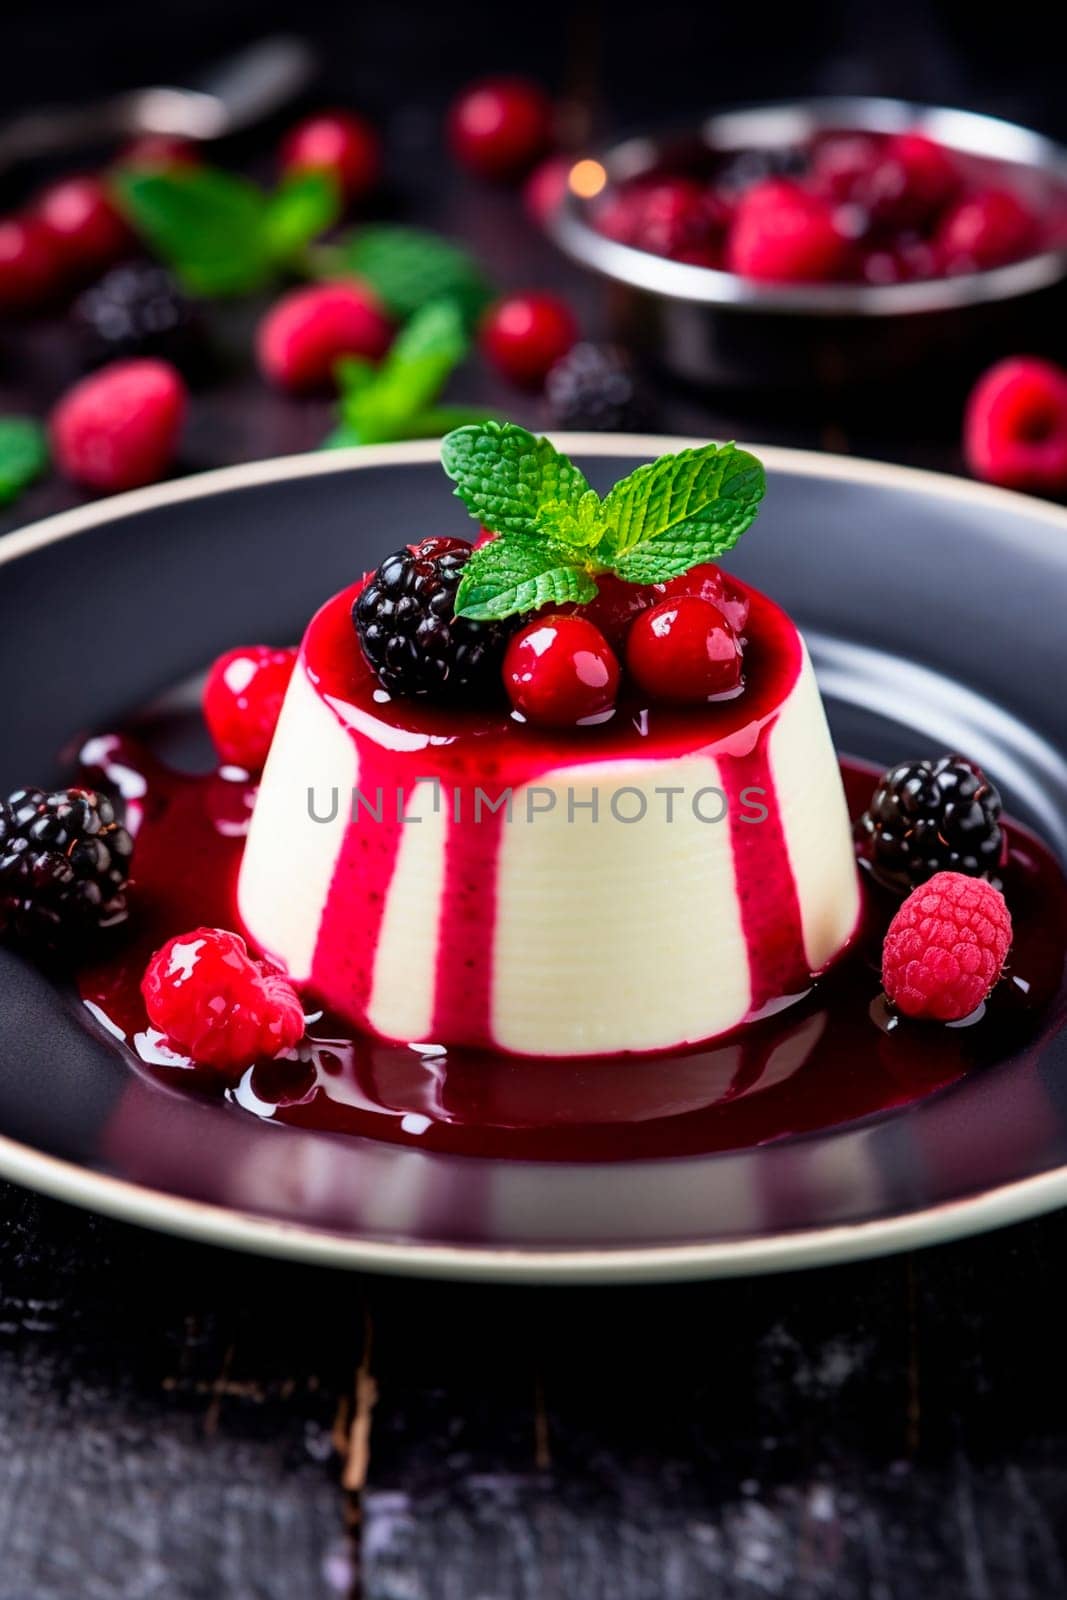 Panna cotta with berries on a plate. Selective focus. Food.